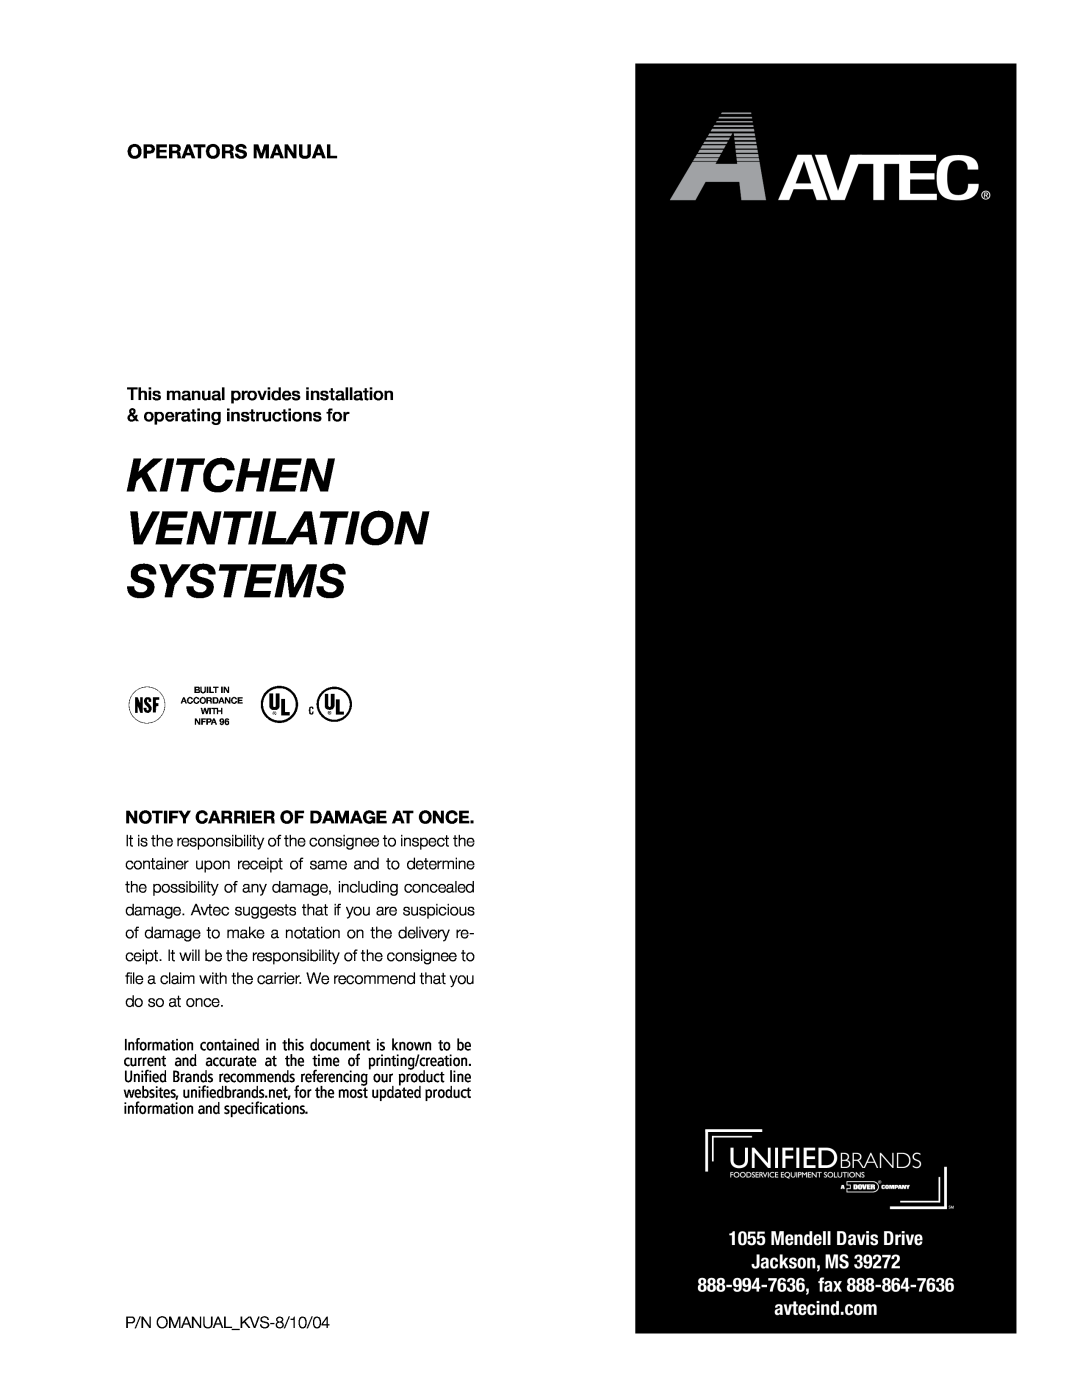 Unified Brands Kitchen Ventilation Systems operating instructions Operators Manual, Mendell Davis Drive Jackson, MS 